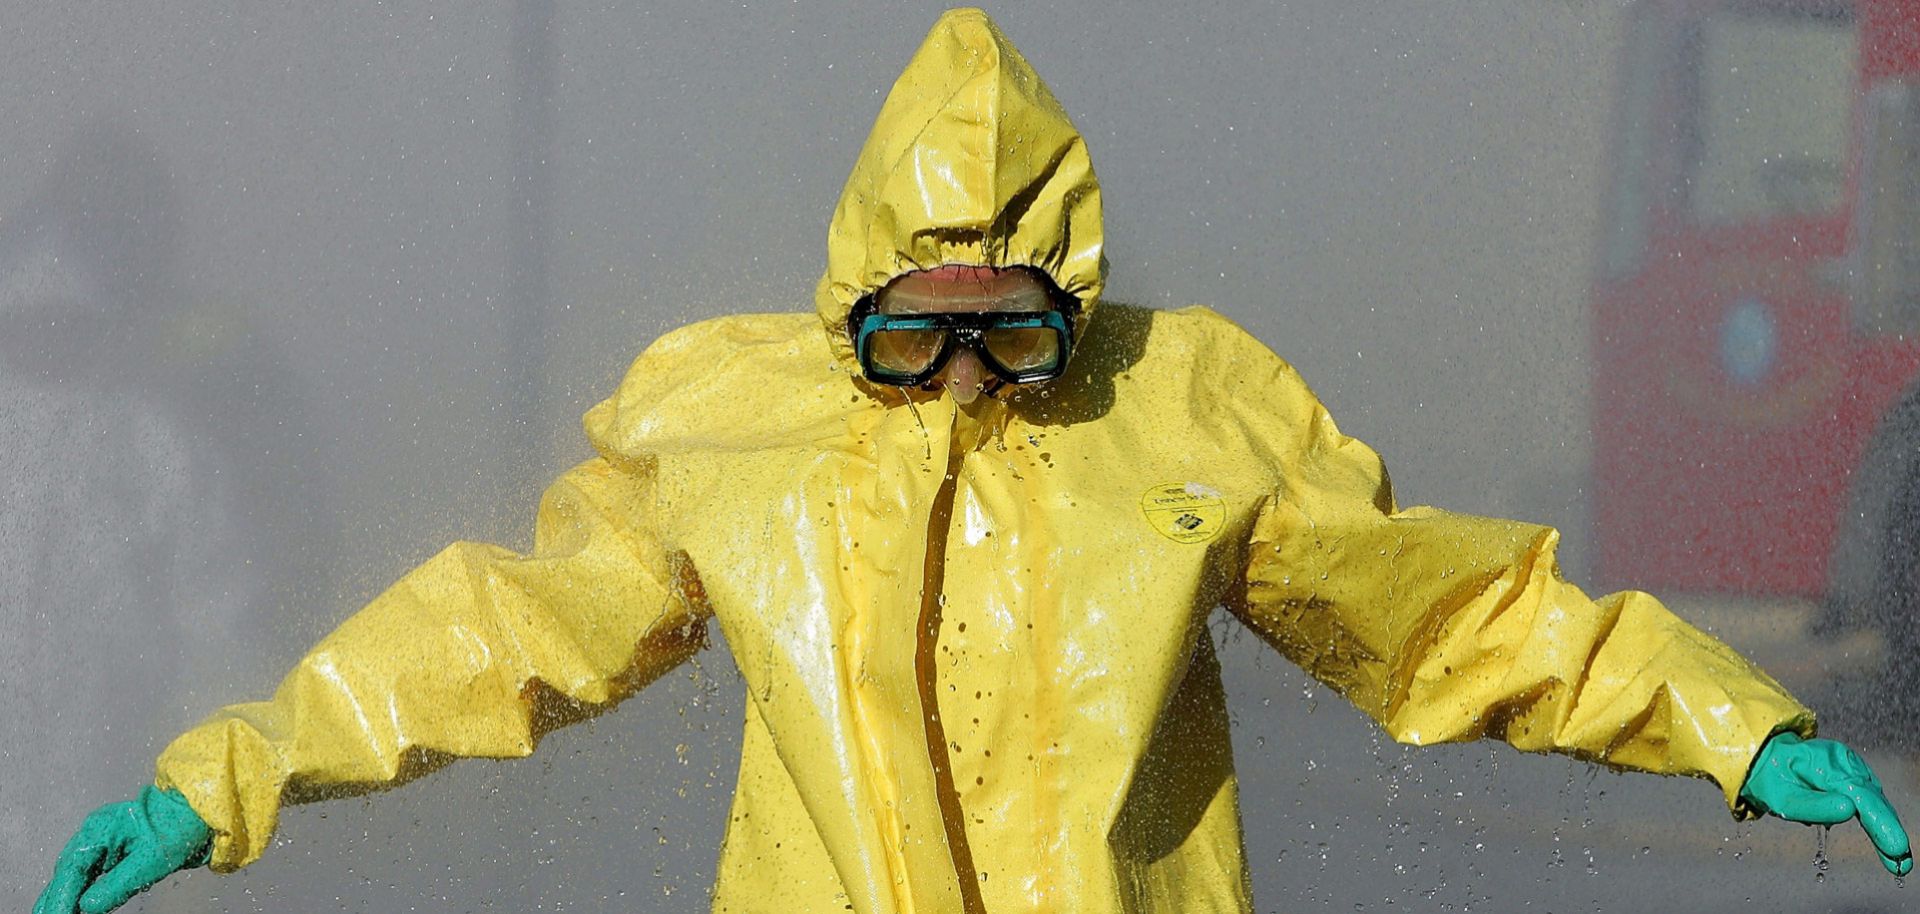 A man in a hazardous materials suit goes through a decontamination shower during a WMD training workshop in California.